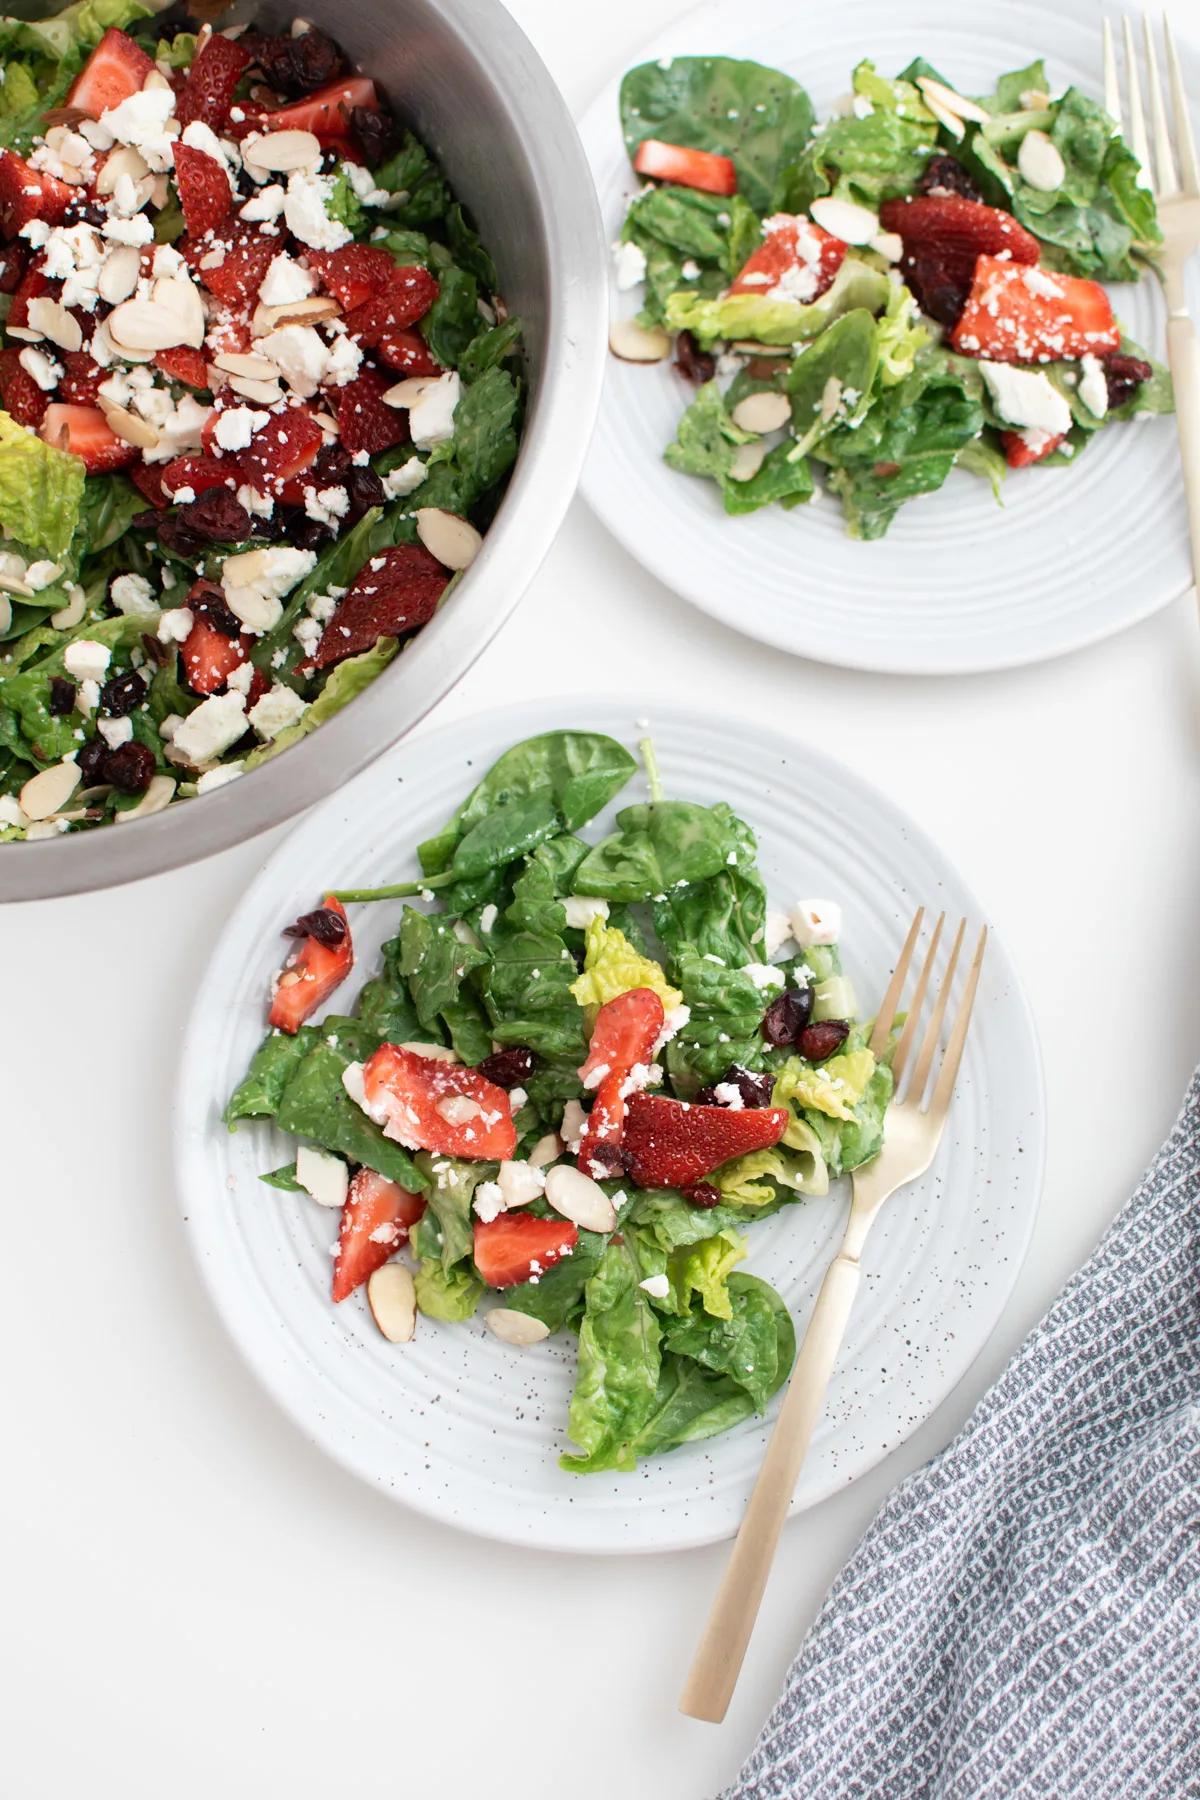 Two plates of spinach strawberry salad with almonds and feta next to salad bowl.